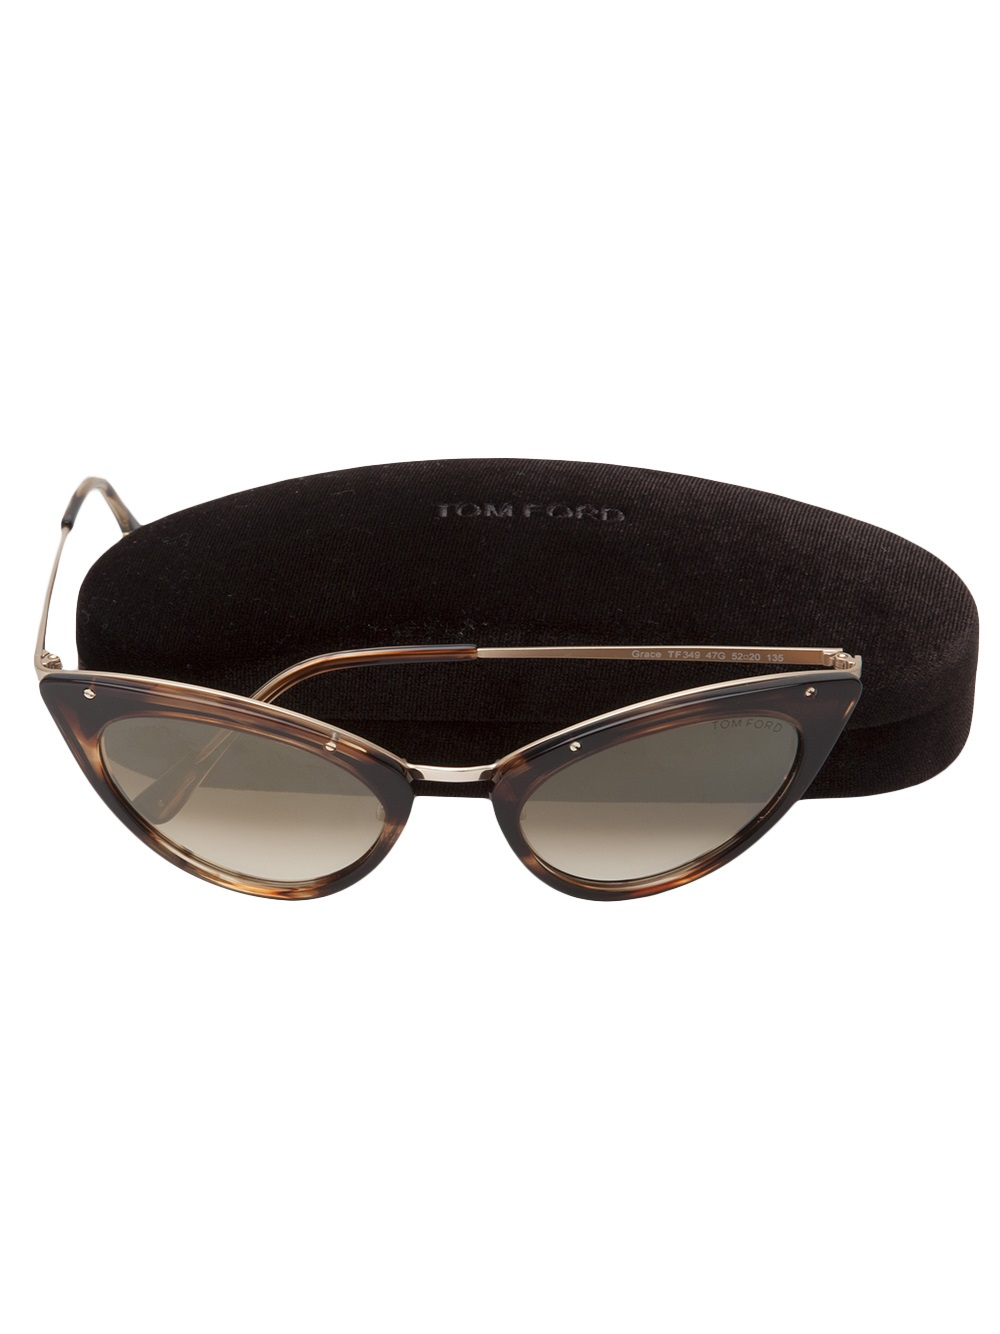 Luik palm Beknopt Tom Ford Donna Sunglasses in Brown | Lyst